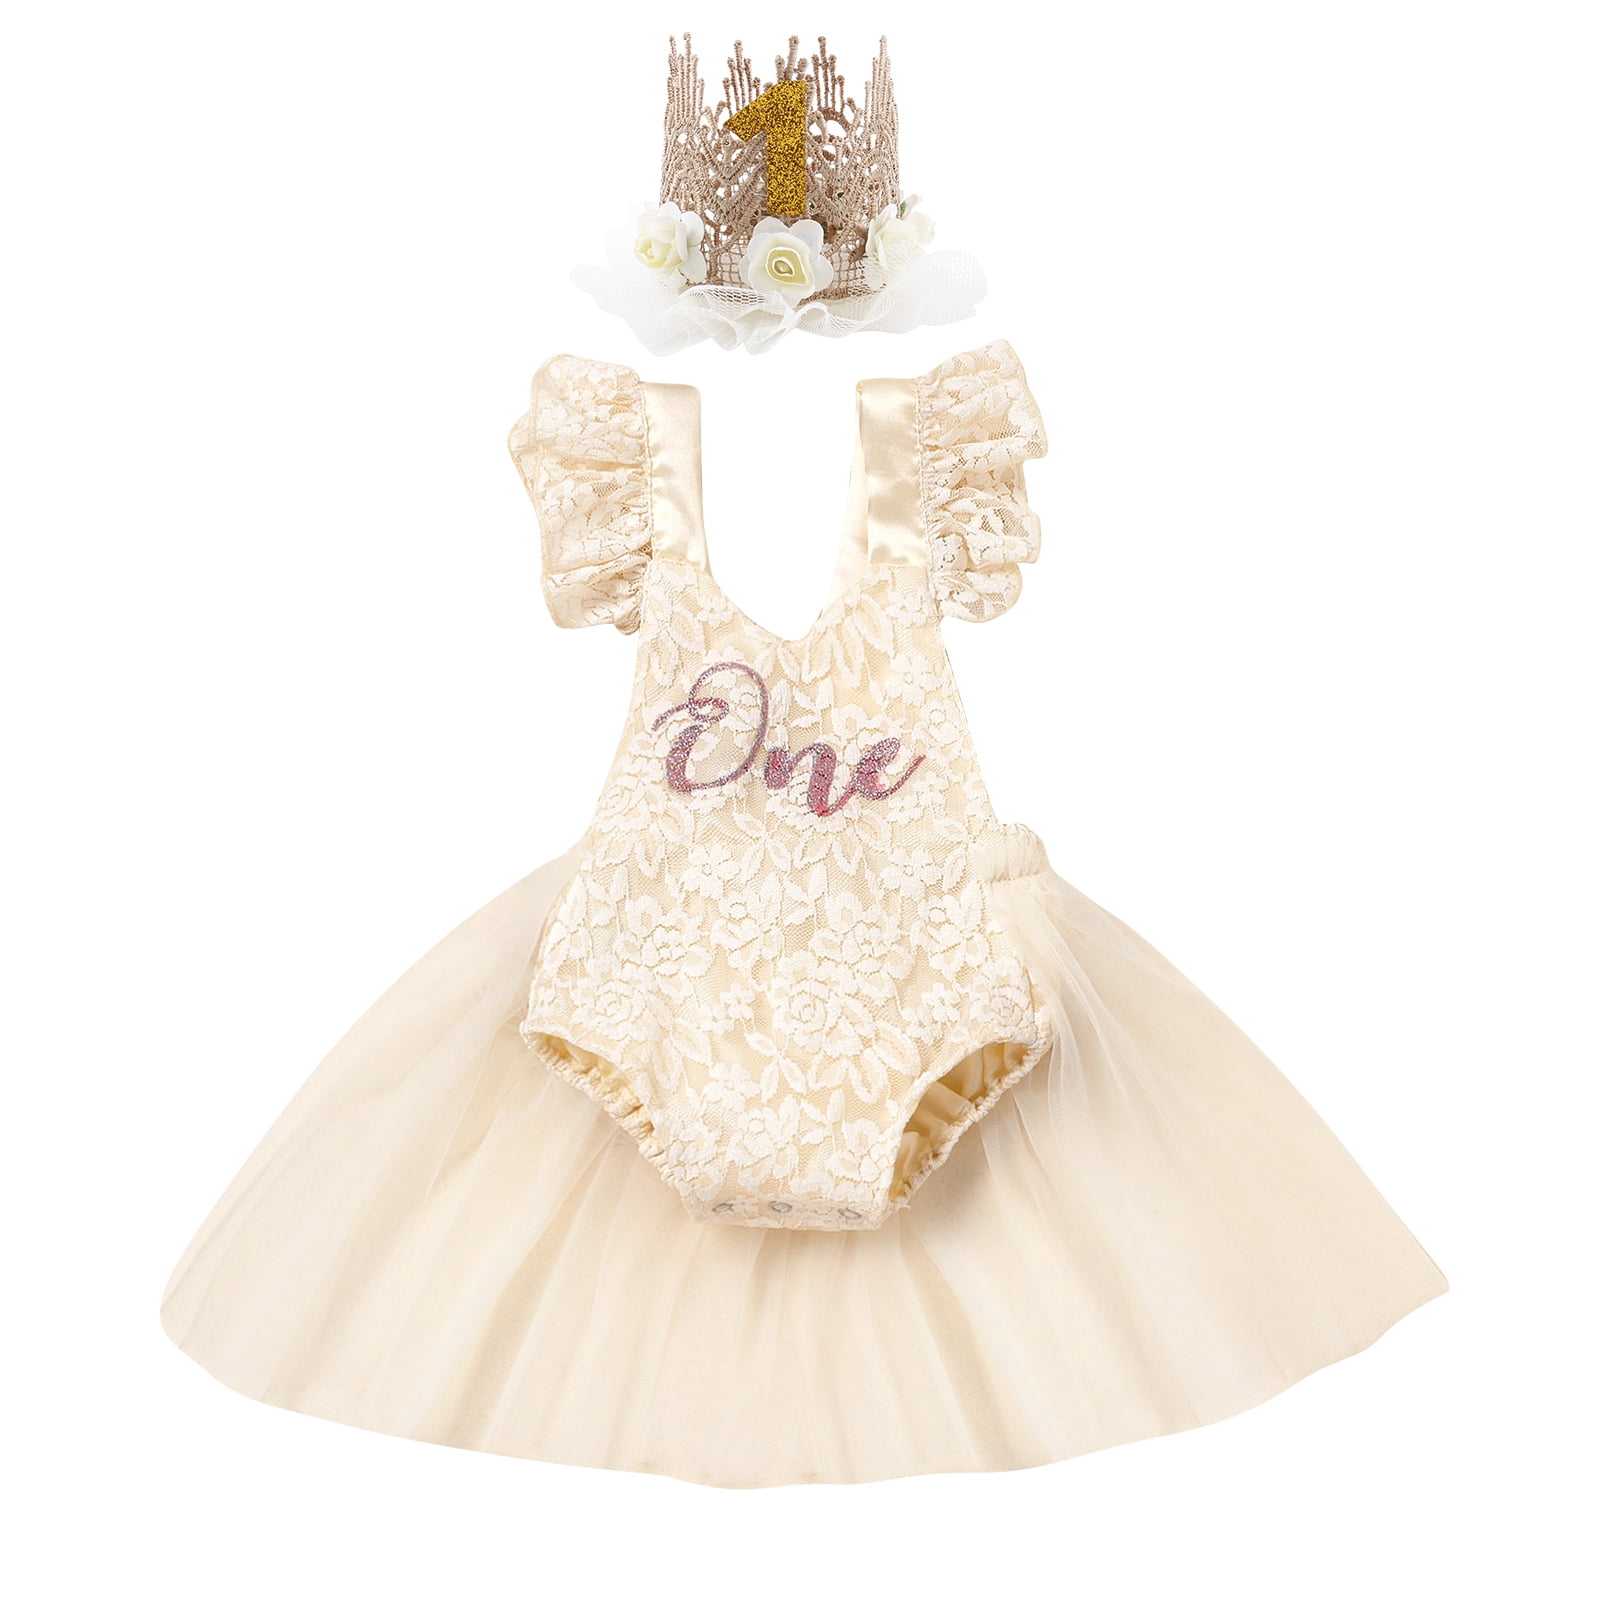 Pink Tulle Little Flower Dresses For Baptism, 1st Birthday, Christening,  And Party Princess Outfit From Huoyineji, $31.56 | DHgate.Com